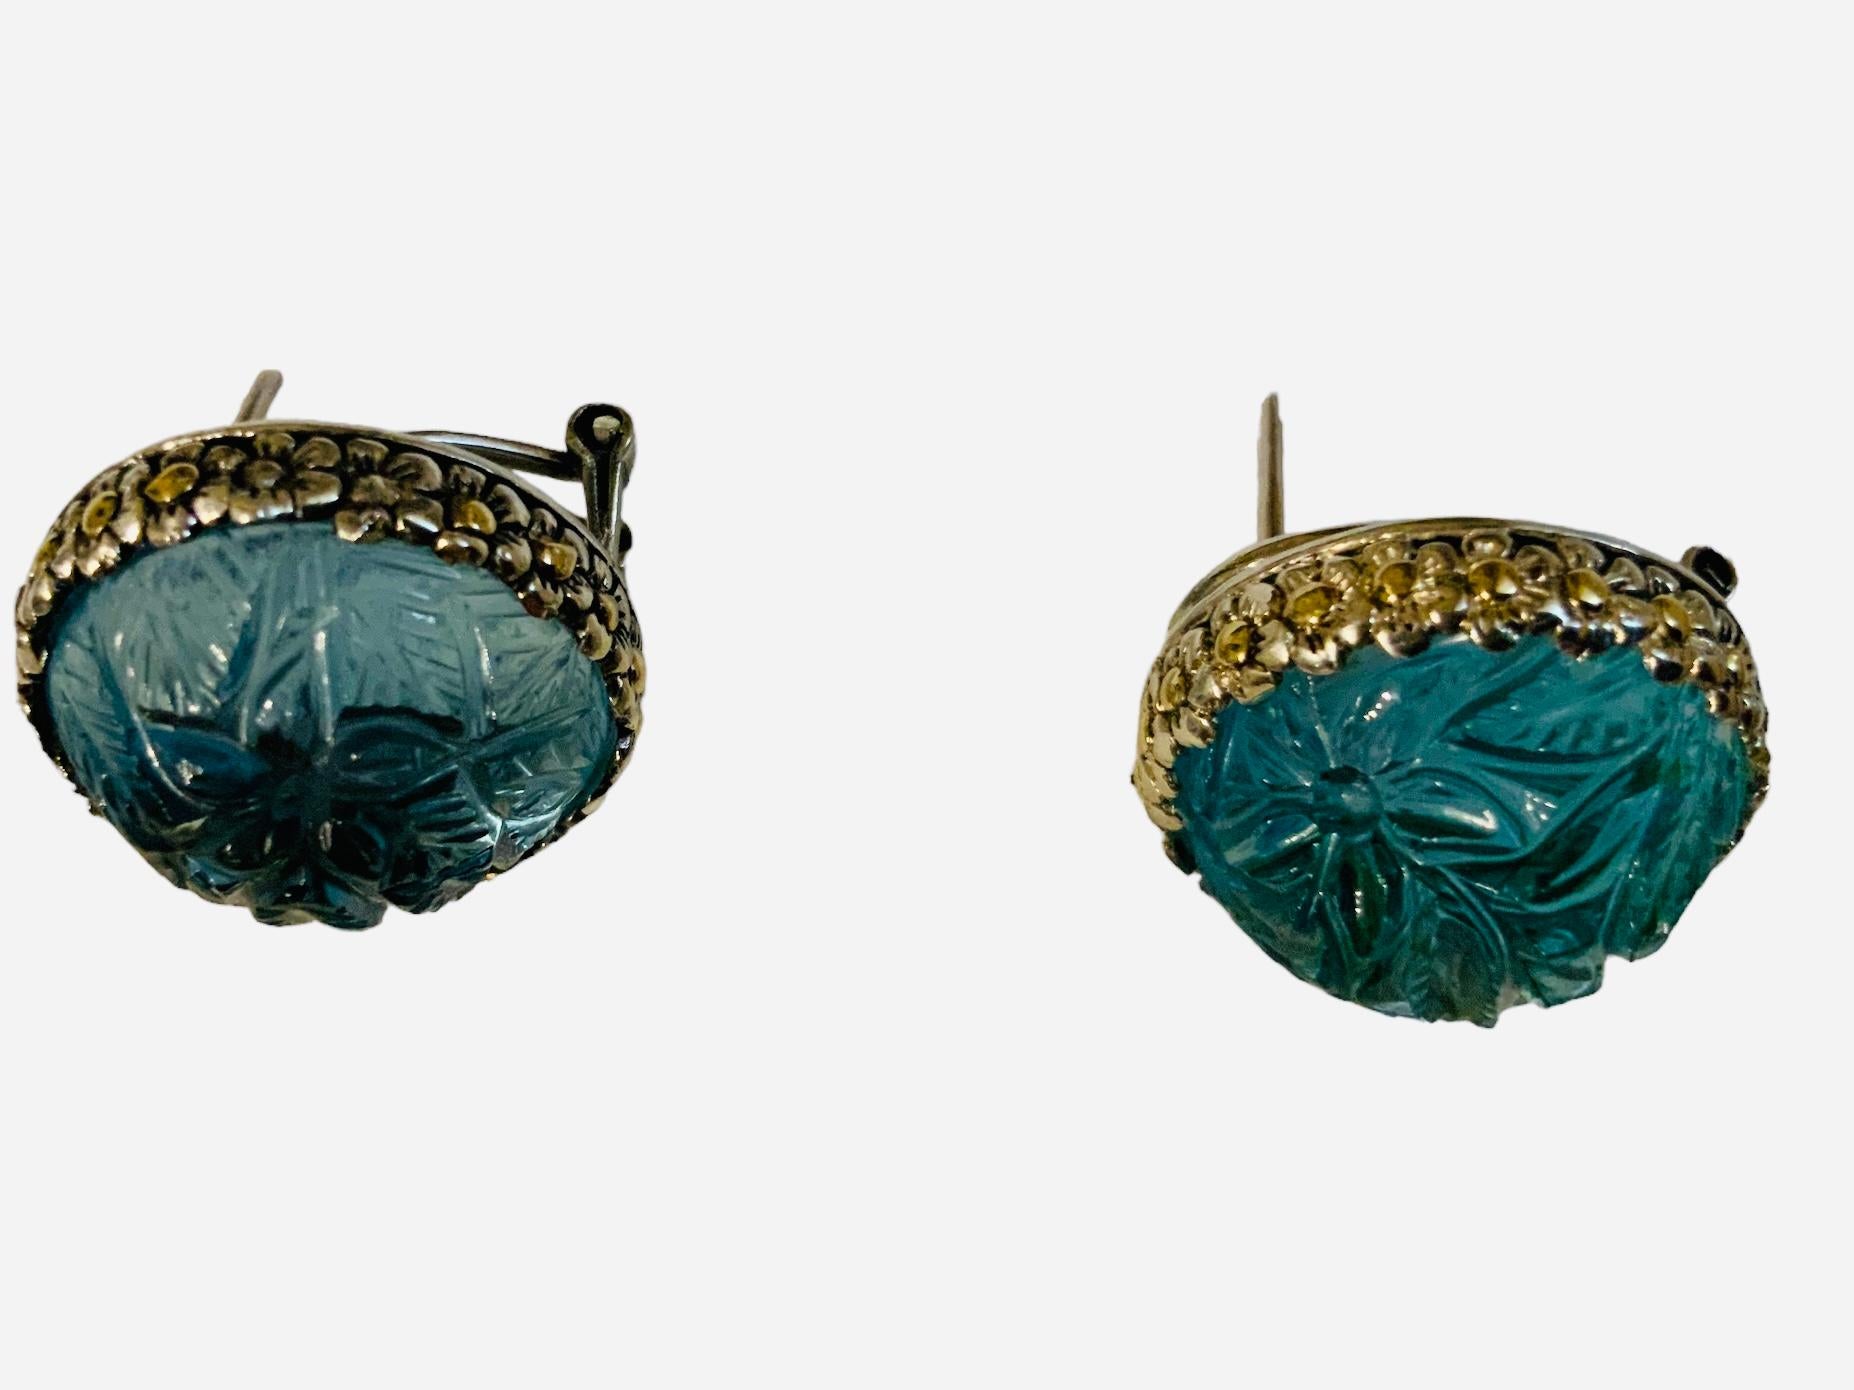 This is an 18K Gold and 925 Sterling Silver Blue Topaz pair of earrings. It depicts a pair of earrings consisting of a light blue topaz round dome carved with branches of flowers and leaves mounted in 925 sterling bezel setting. The border around